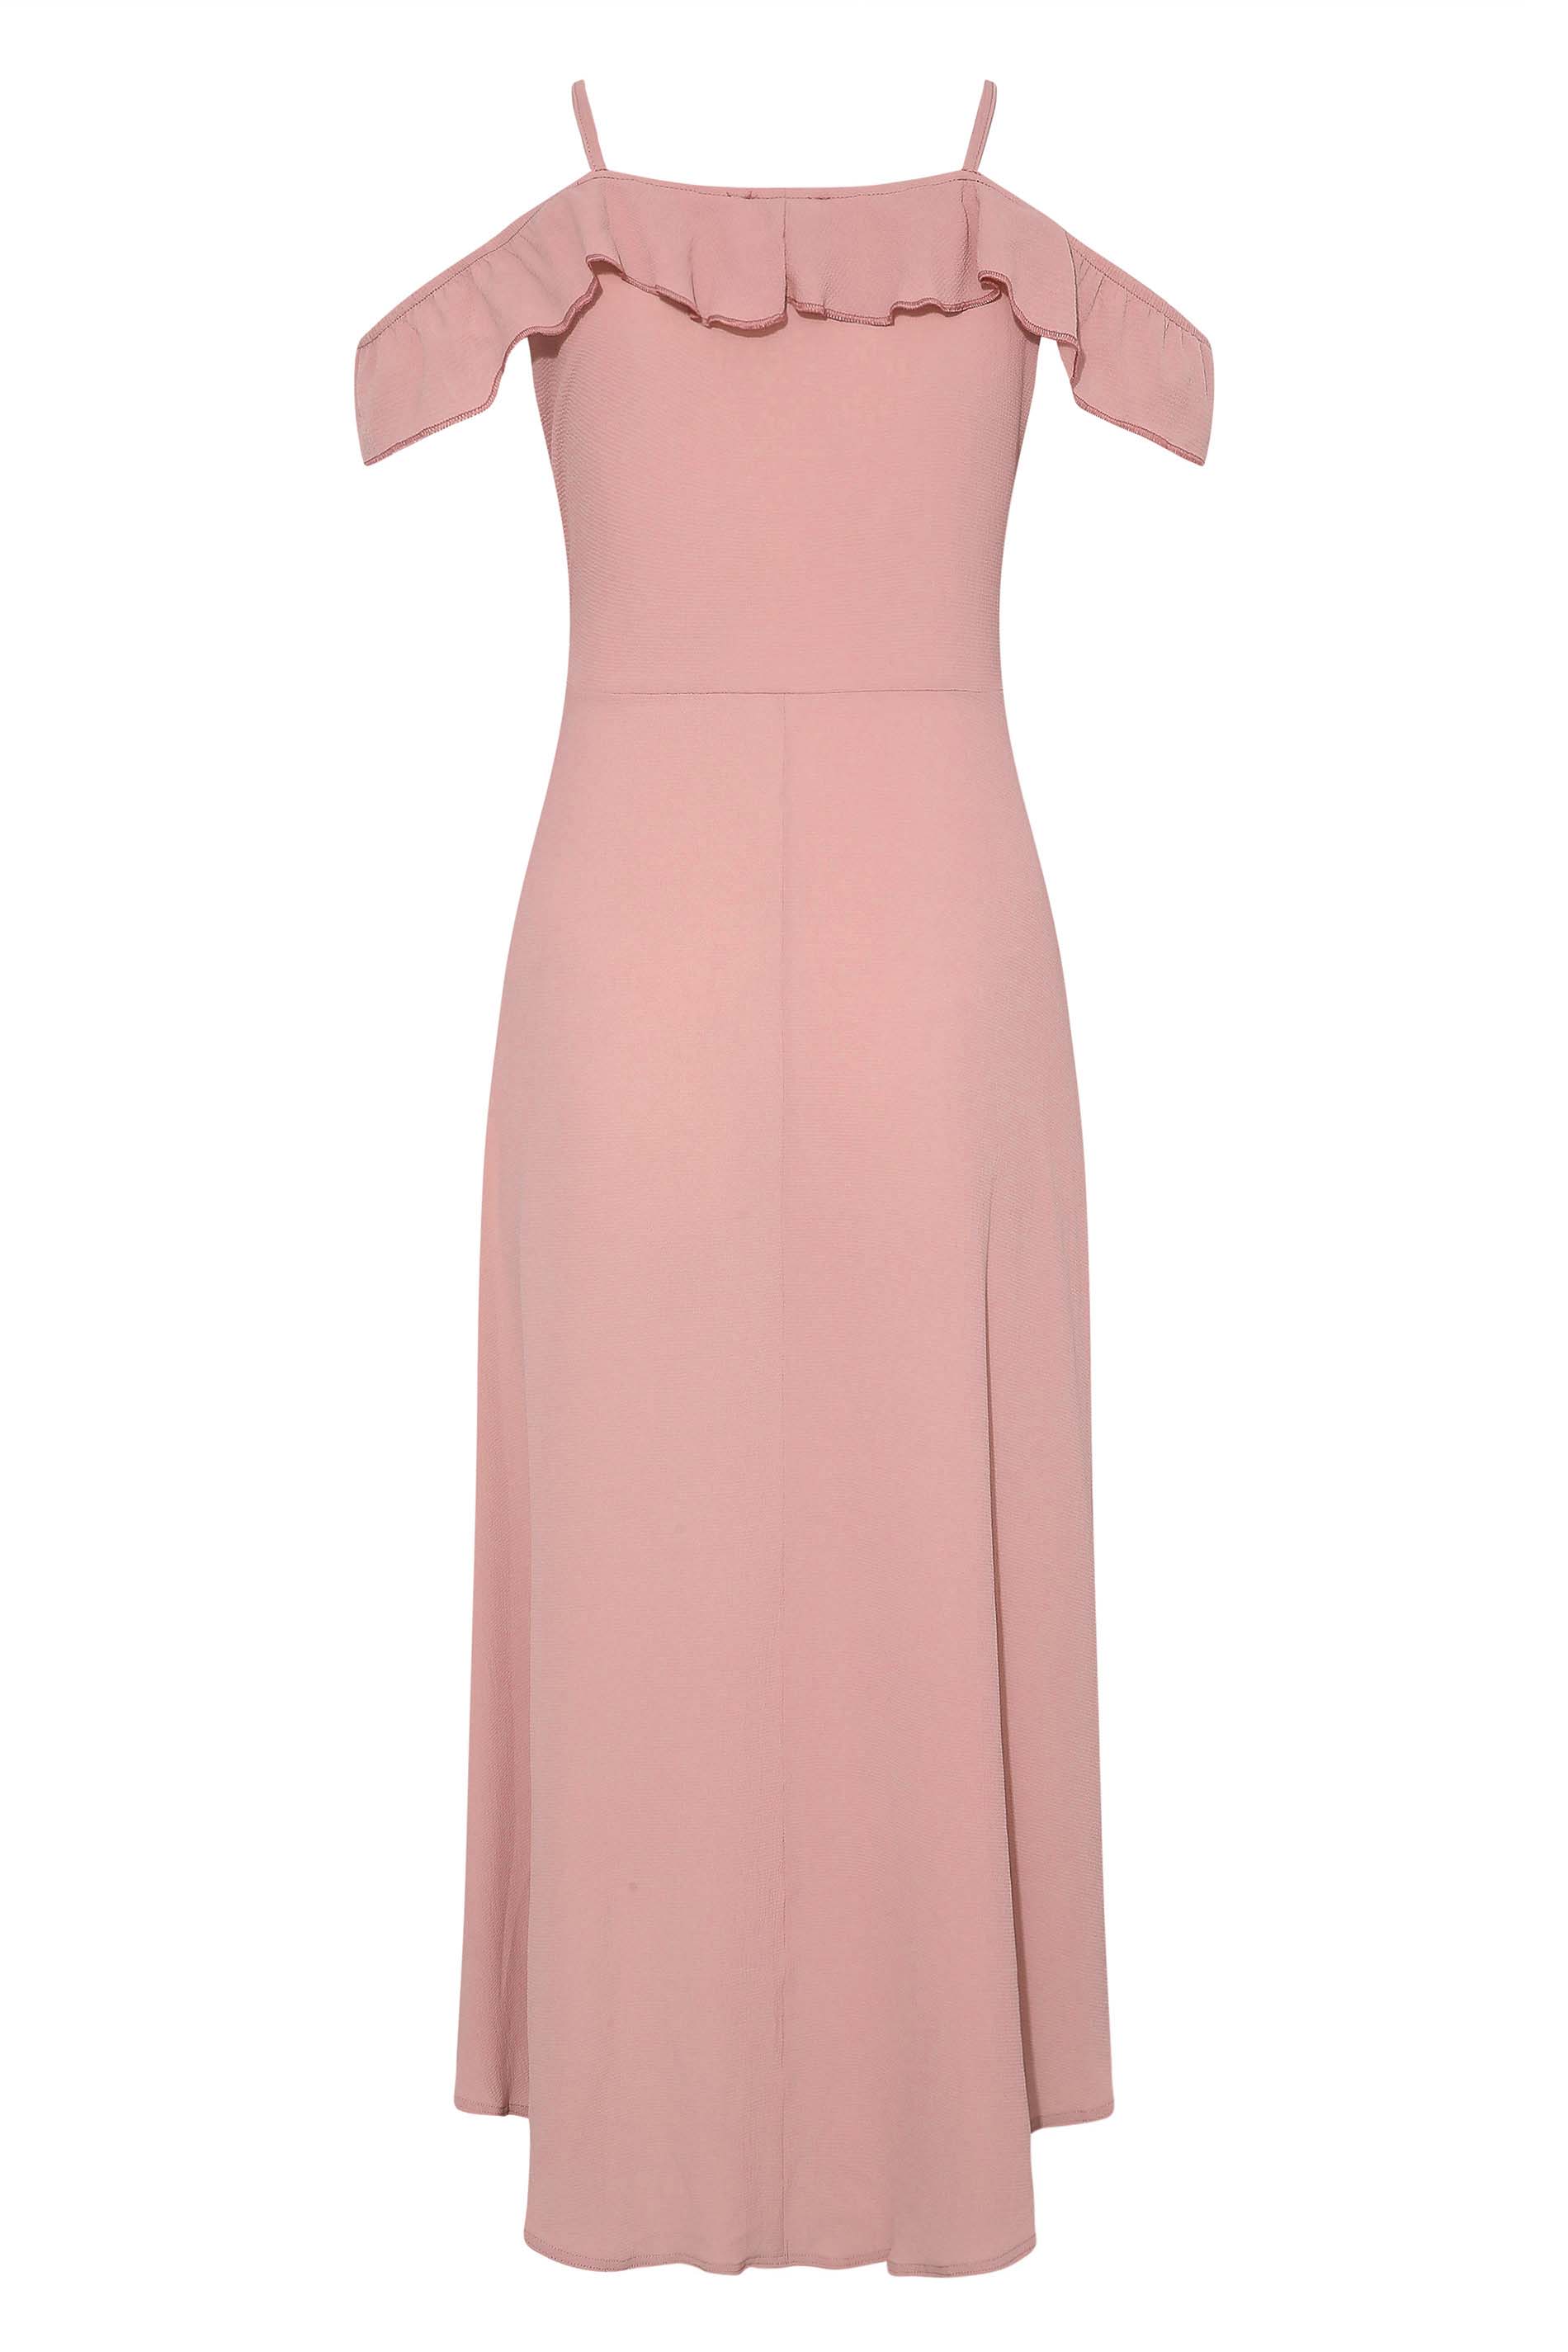 Robes Grande Taille Grande taille  Robes Longues | YOURS LONDON - Robe Maxi Rose Pastel Bardot Volanté - PP17054